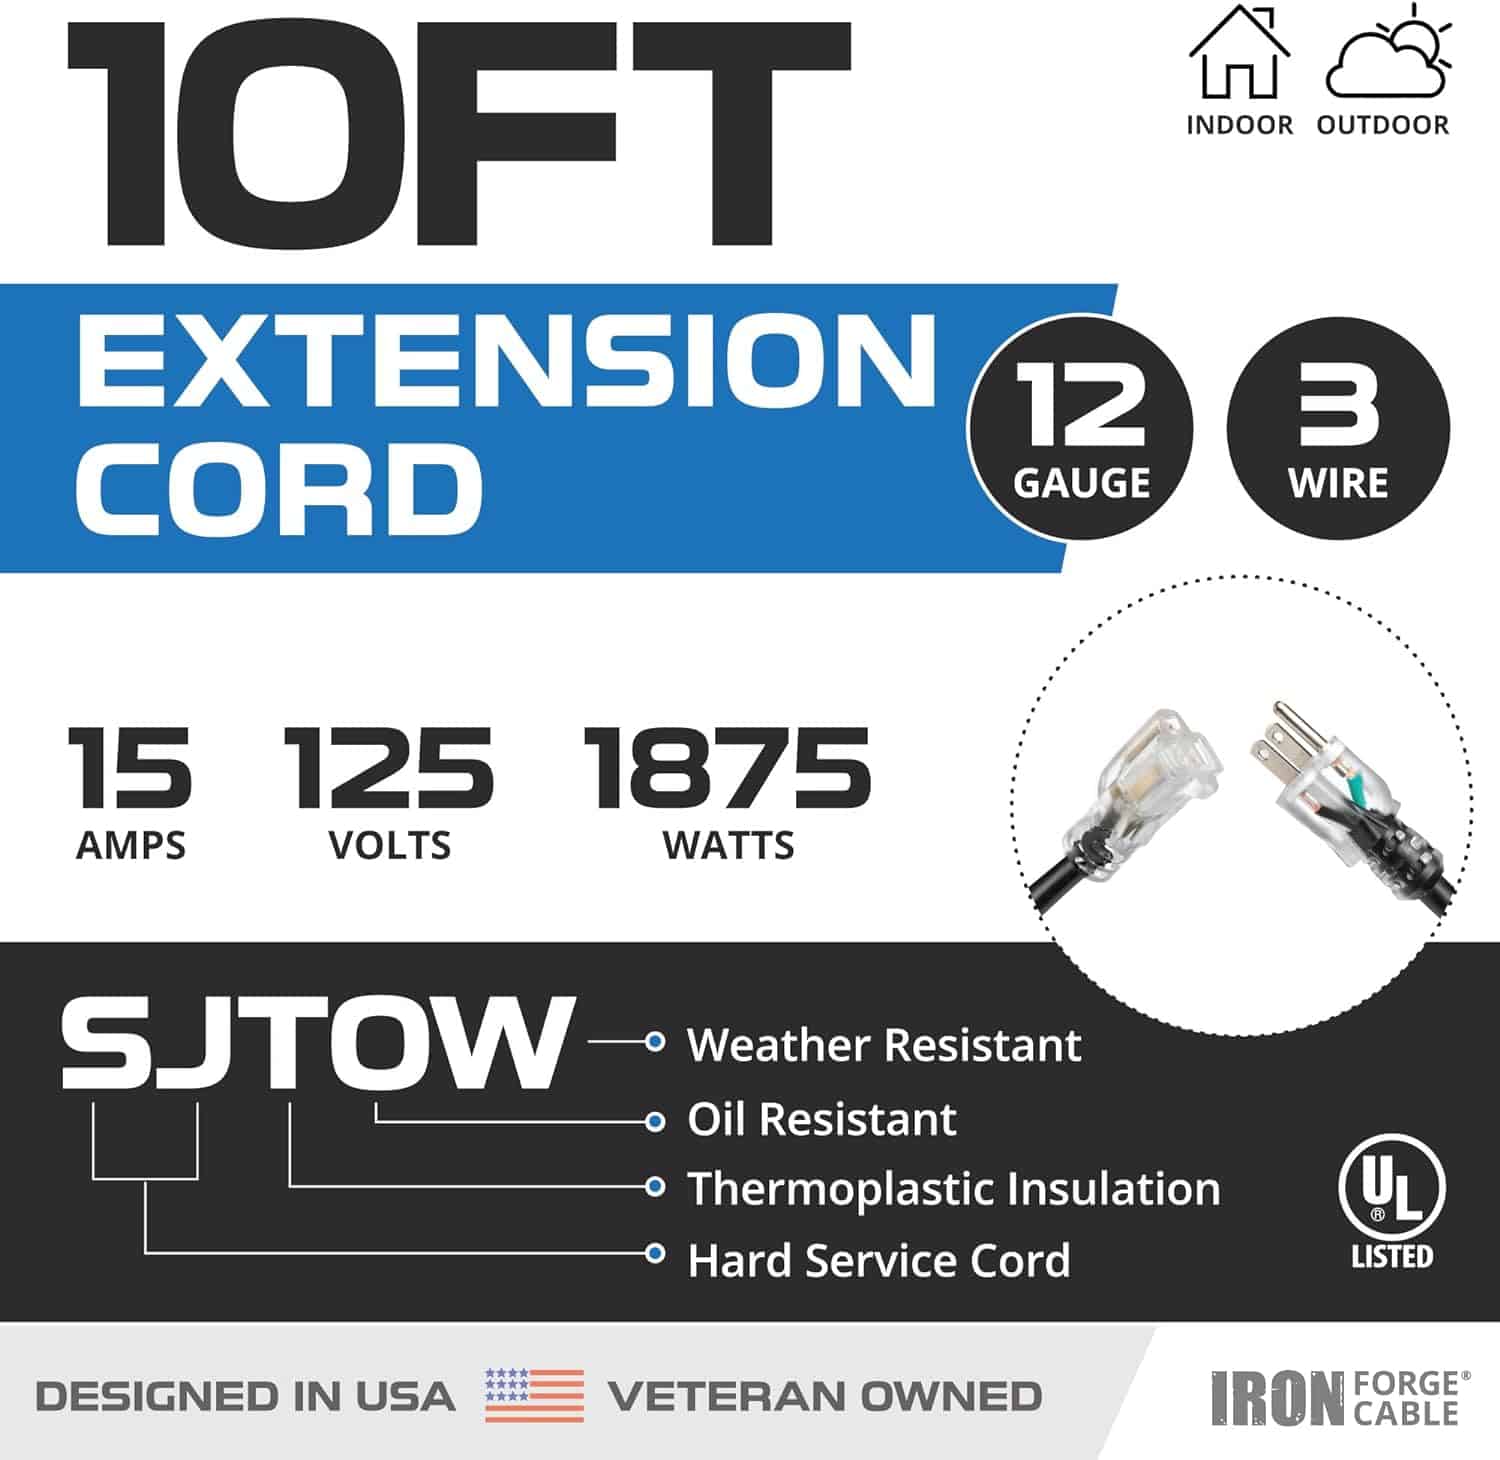 Iron Forge 10 Ft Heavy Duty Extension Cord Outdoor, SJTOW Oil Resistant 12 Gauge Extension Cord 10ft with 3 Prong, 12 3 Black Extension Cord Great for Farm, Ranch, Workshop – 15 AMP, US Veteran Owned 2